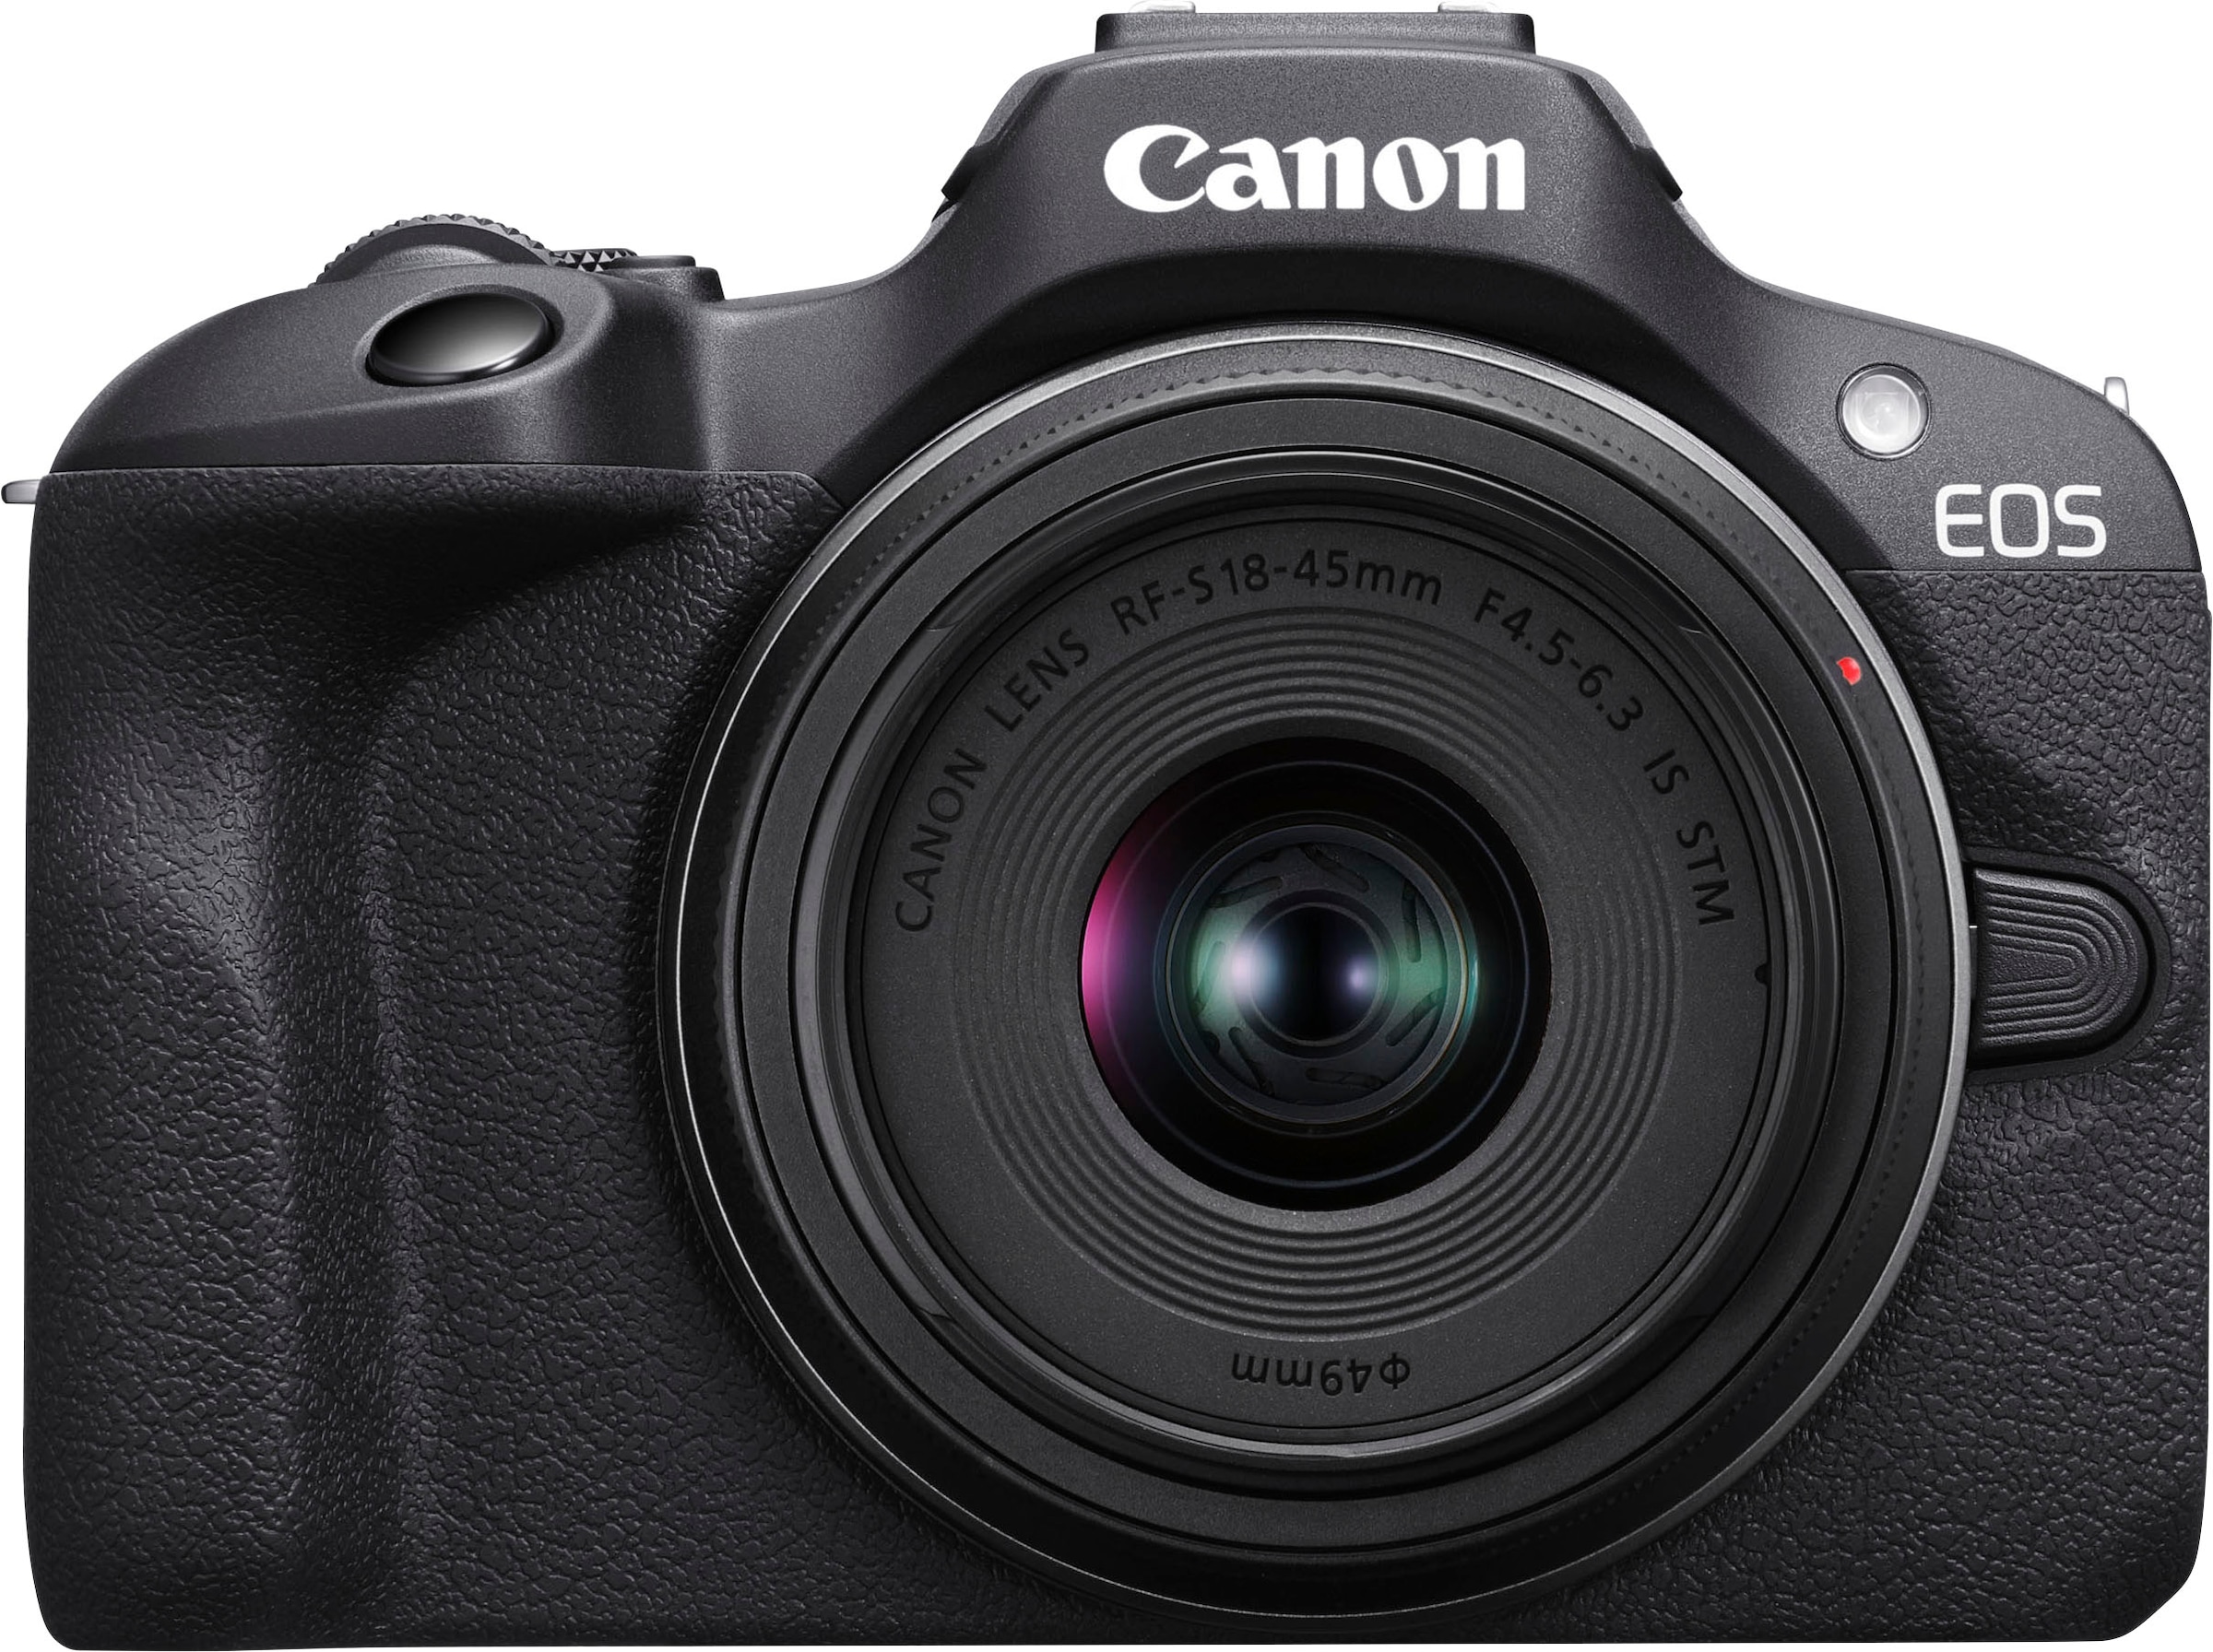 Canon Systemkamera »EOS R100 + RF-S IS Bluetooth-WLAN F4.5-6.3 STM, 18-45mm STM F4.5-6.3 IS RF-S bei 18-45mm MP, Kit«, 24,1